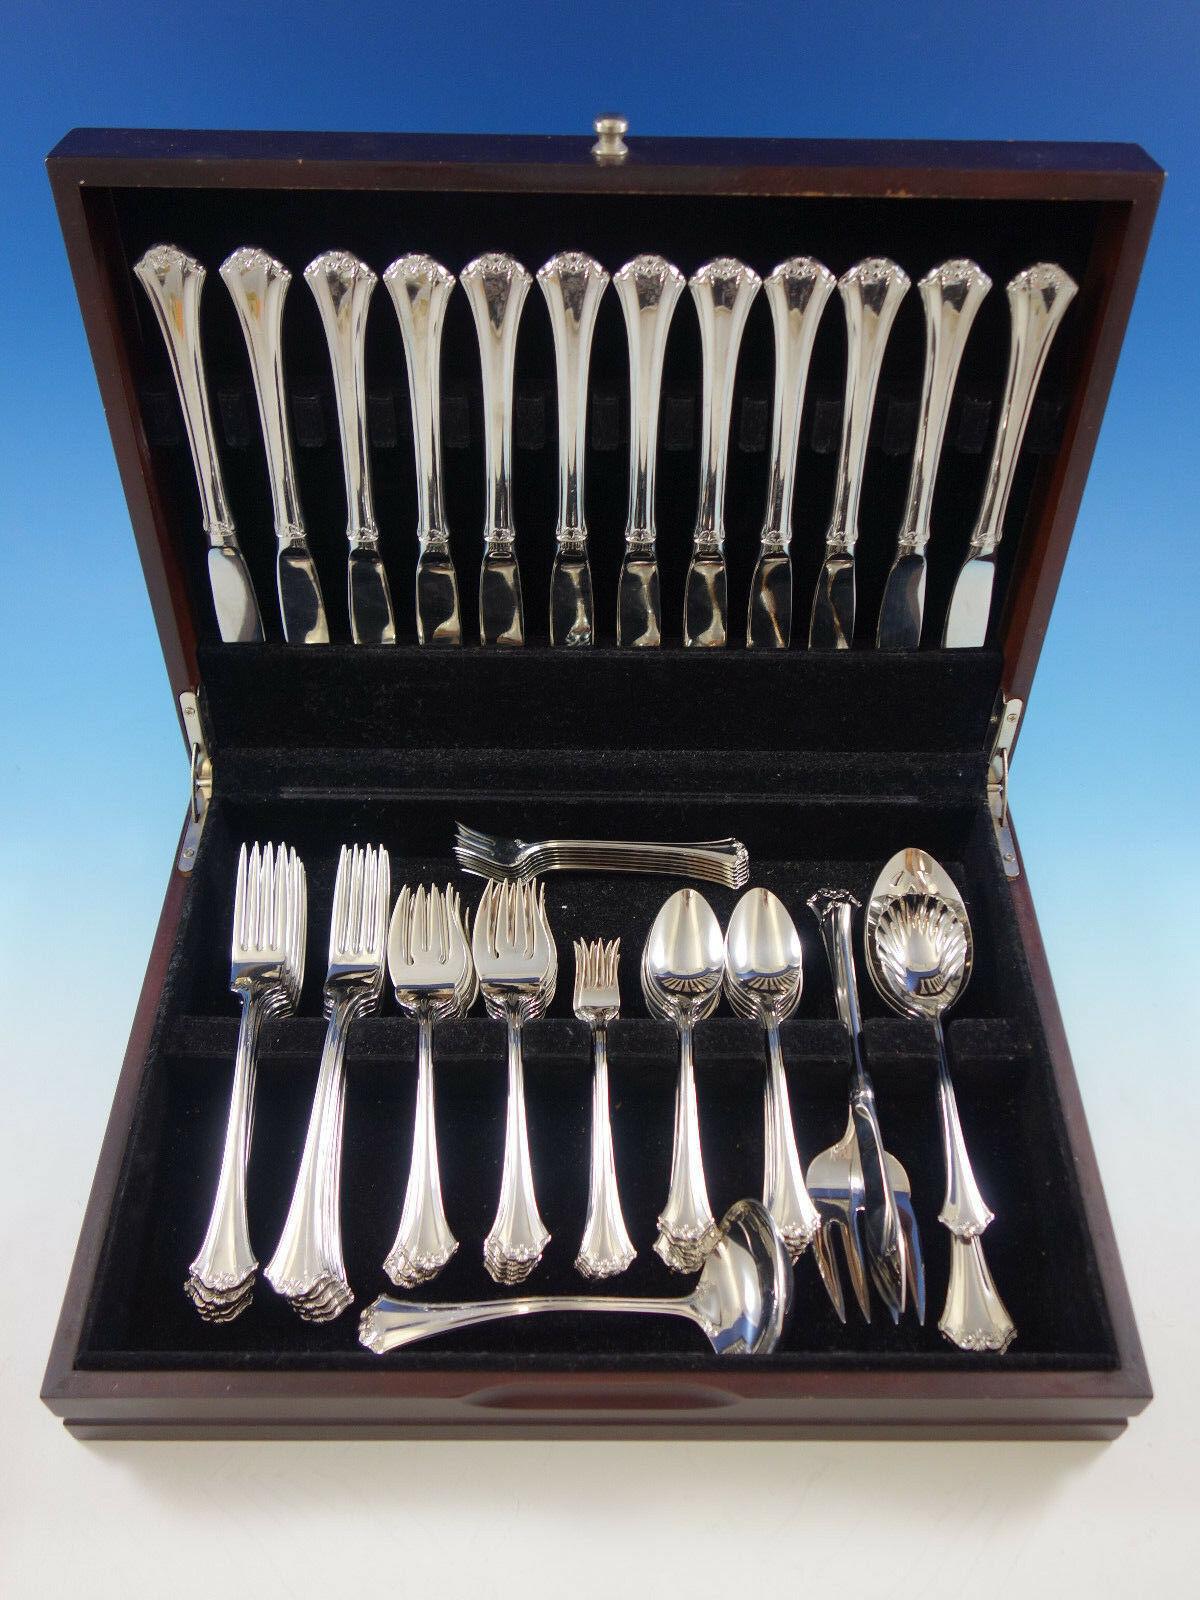 Country French by Reed & Barton stainless steel flatware set, 66 pieces. This set includes:

12 knives, 9